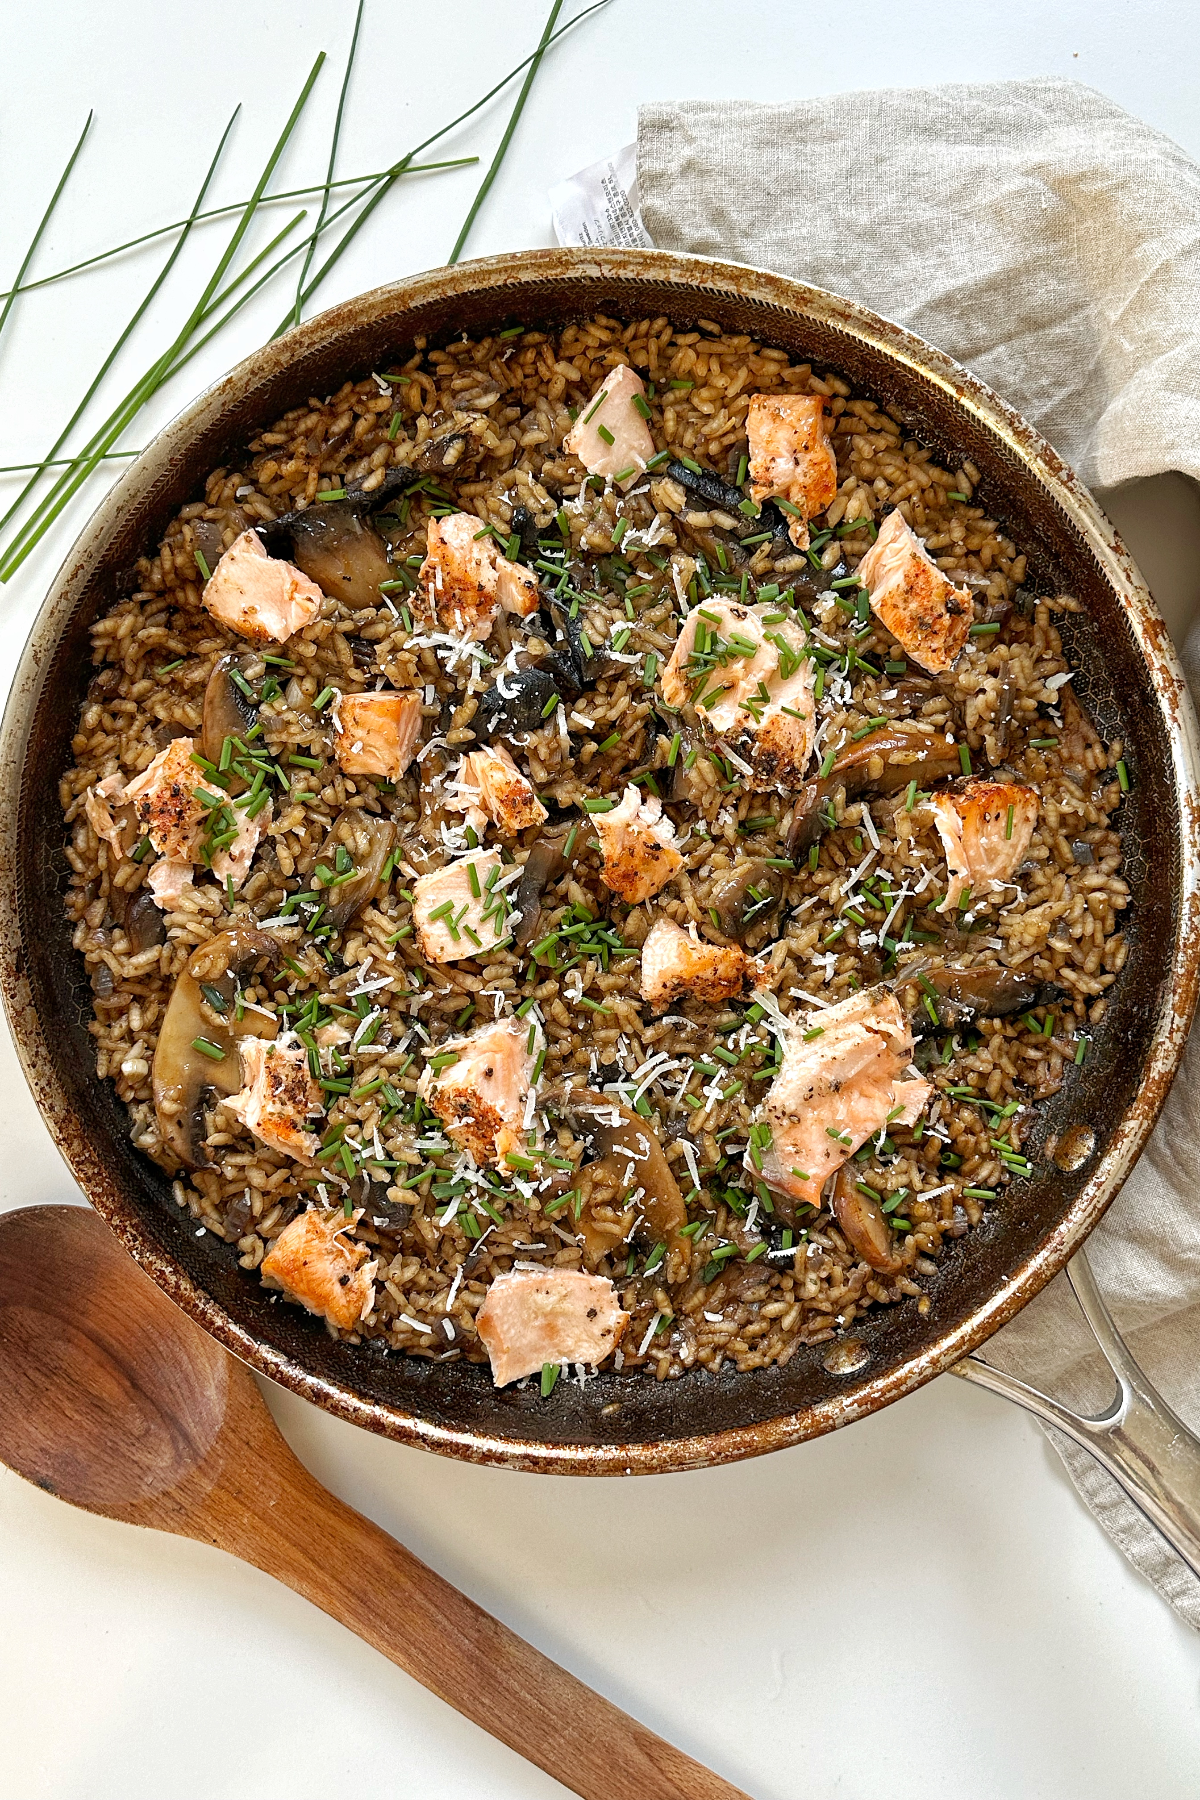 Salmon and mushroom risotto in frying pan with wooden spoon, chives, and napkin surrounding it. 